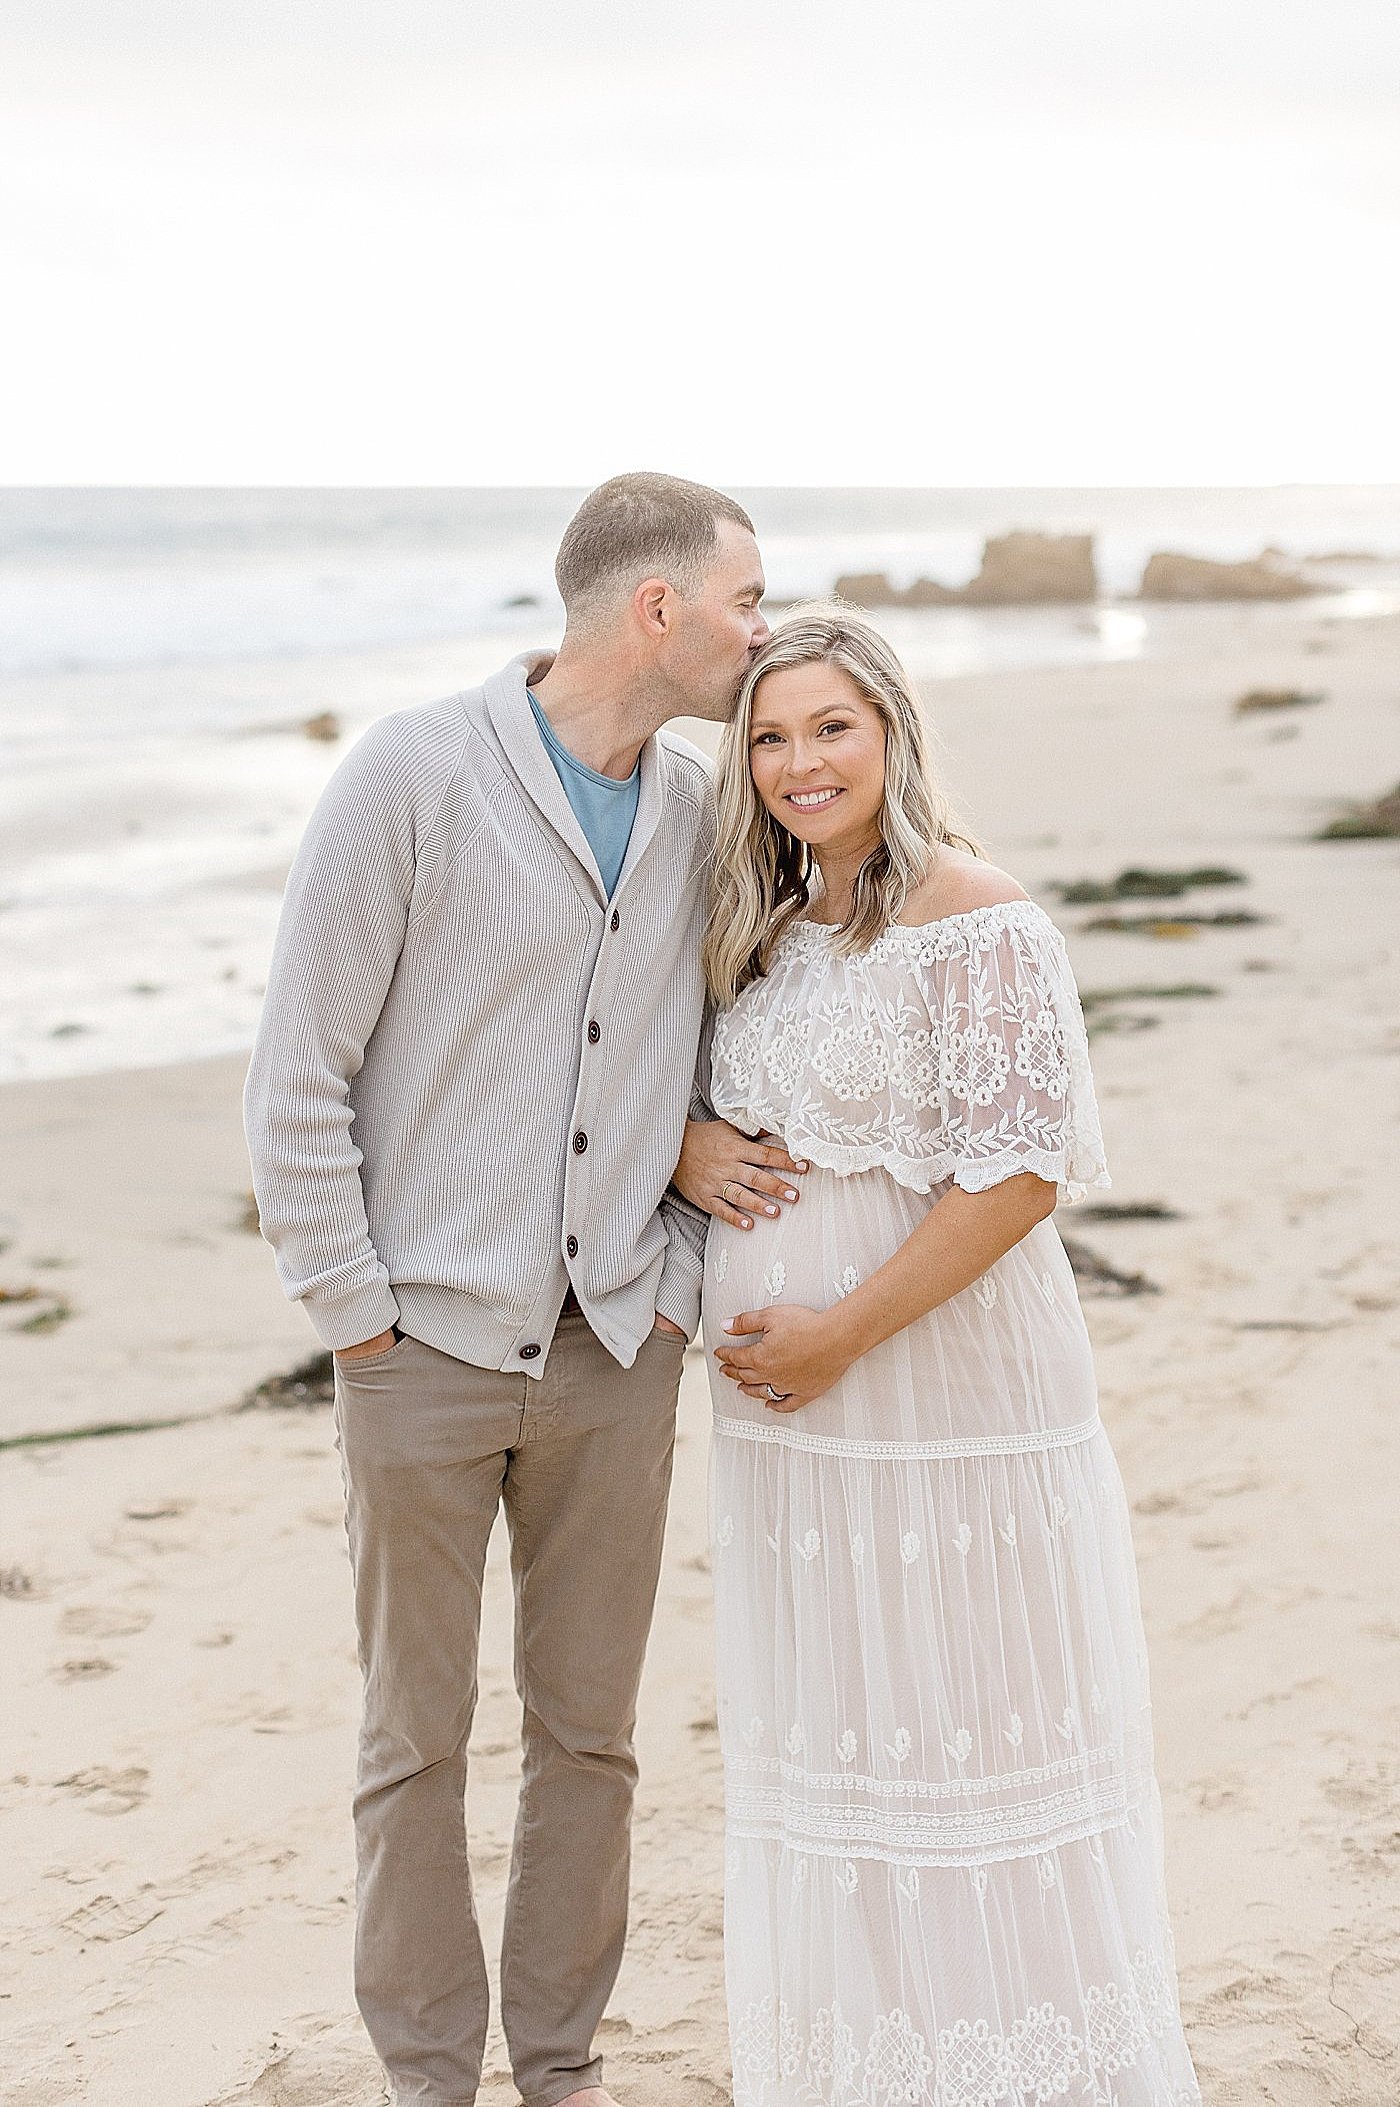 Tips-On-What-To-Wear-For-A-Maternity-Session-Newport-Beach-Maternity-Photographer_0027.jpg